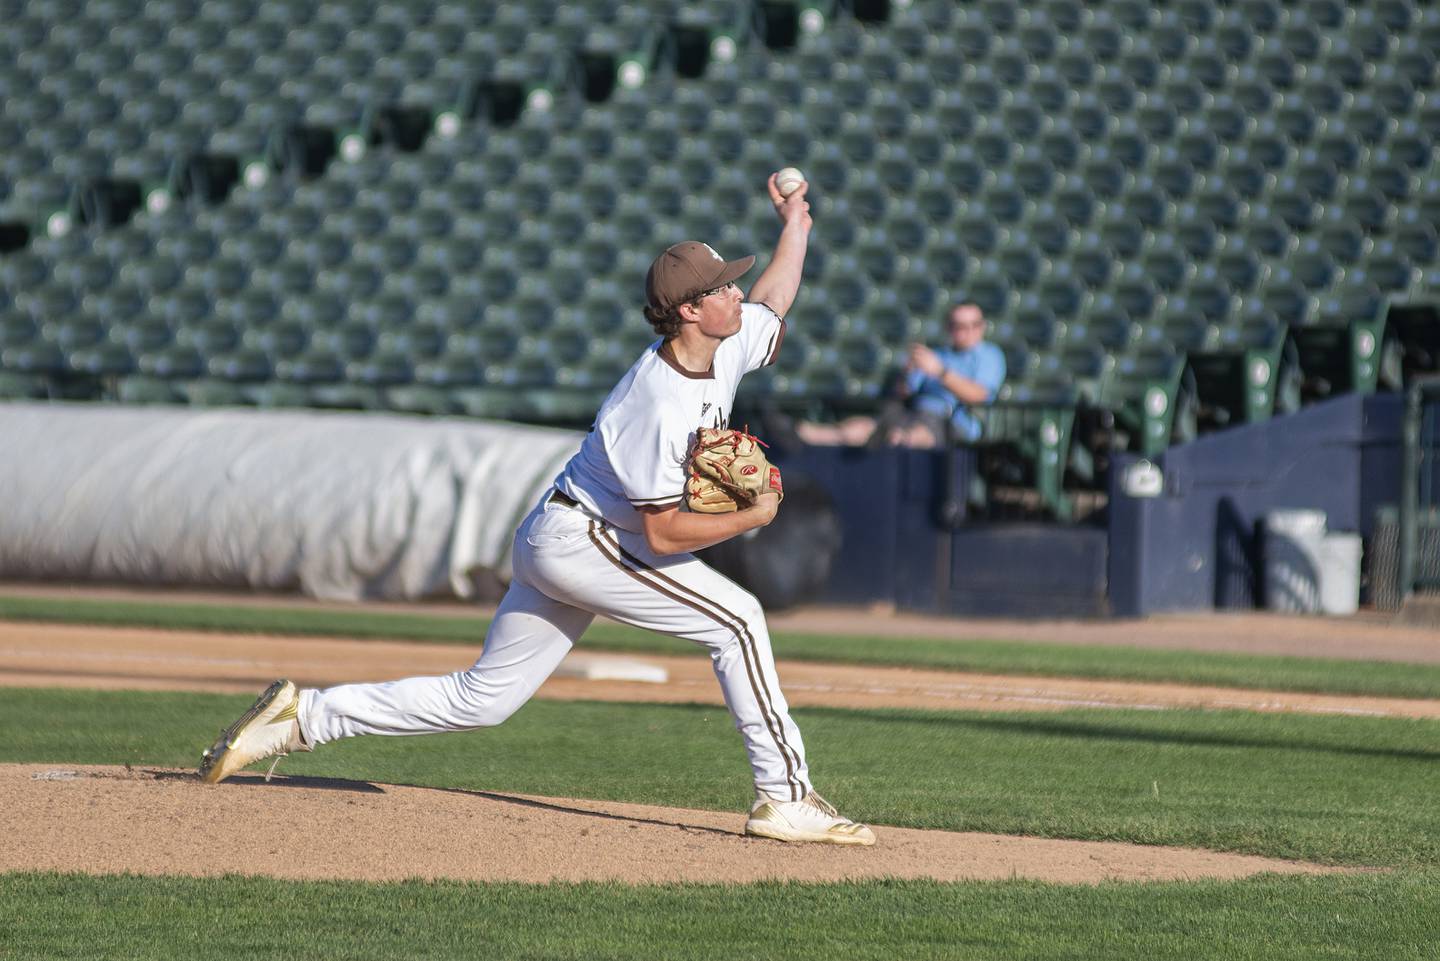 Joliet Catholic’s TJ Schlageter fires a pitch against Columbia Friday, June 3, 2022 during the IHSA Class 2A baseball state semifinal.